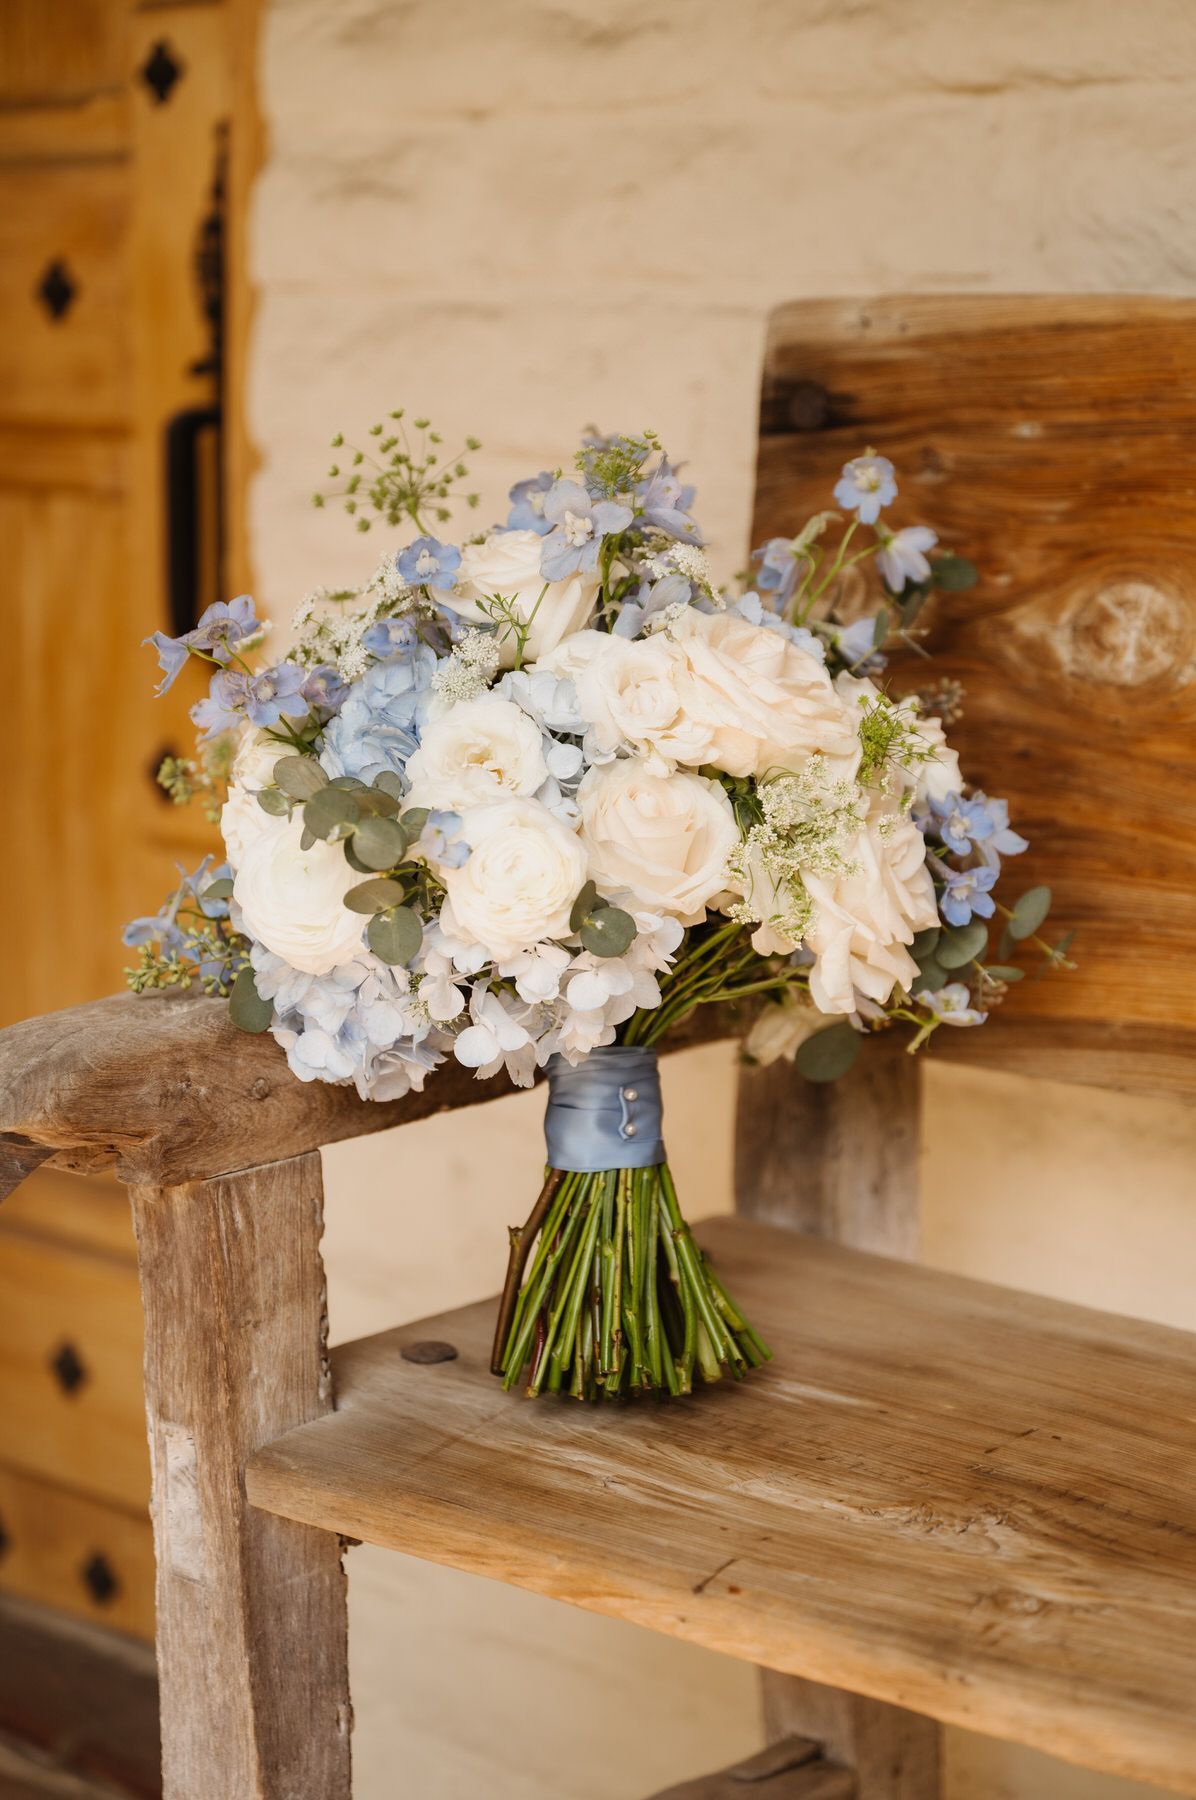 A bouquet of white and blue flowers is sitting on a wooden bench.